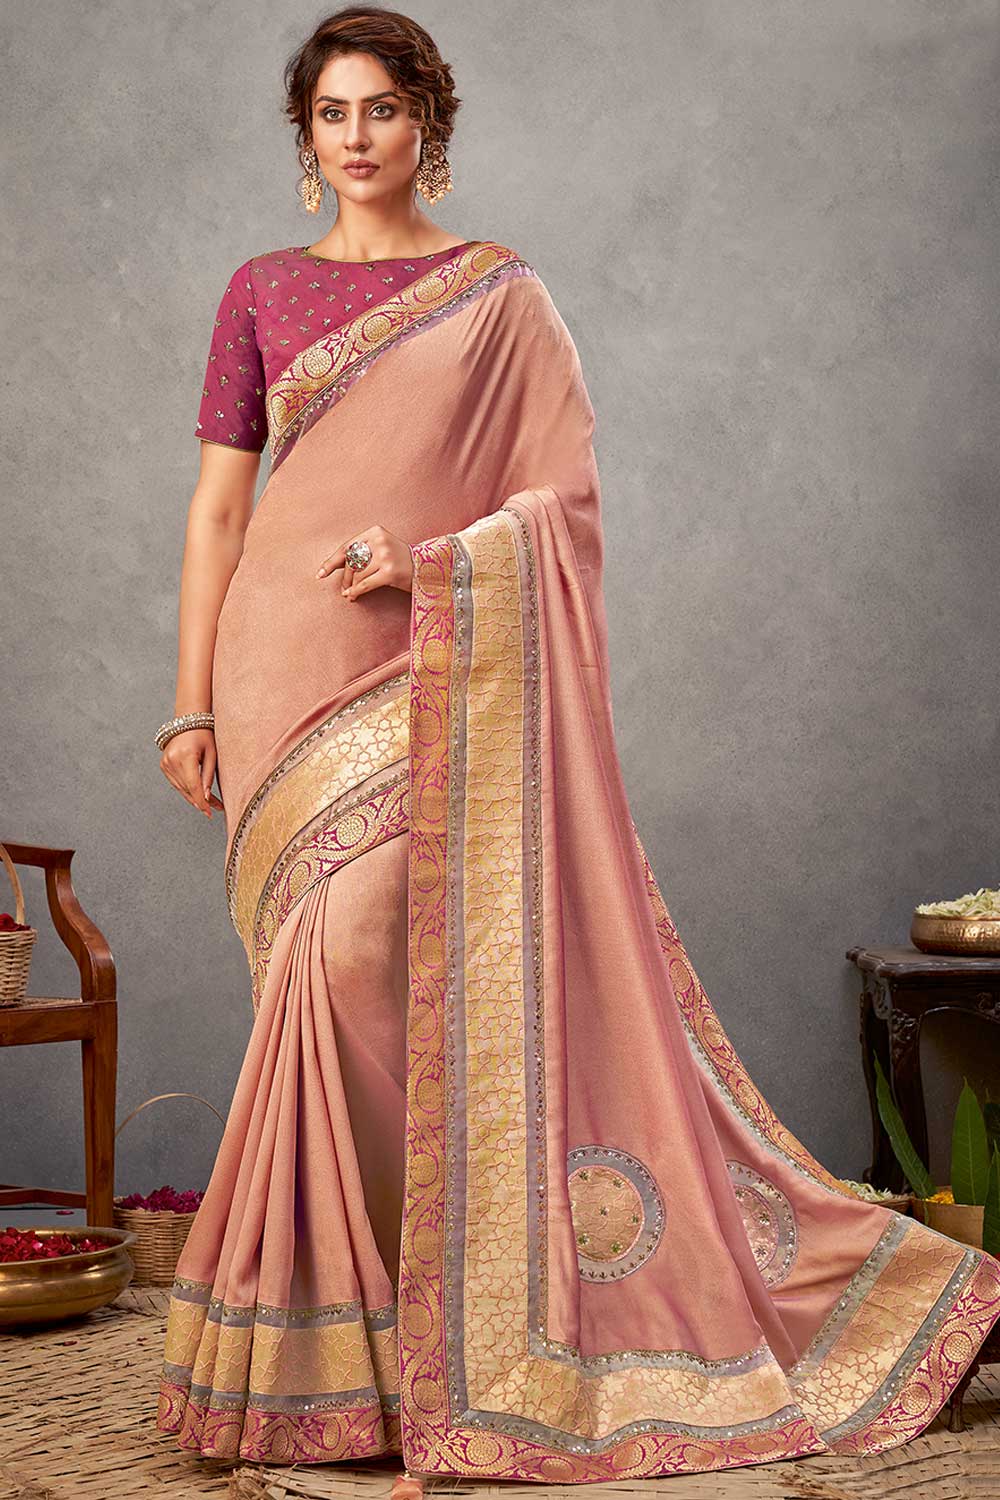 Georgette Saree Collection at Karmaplace